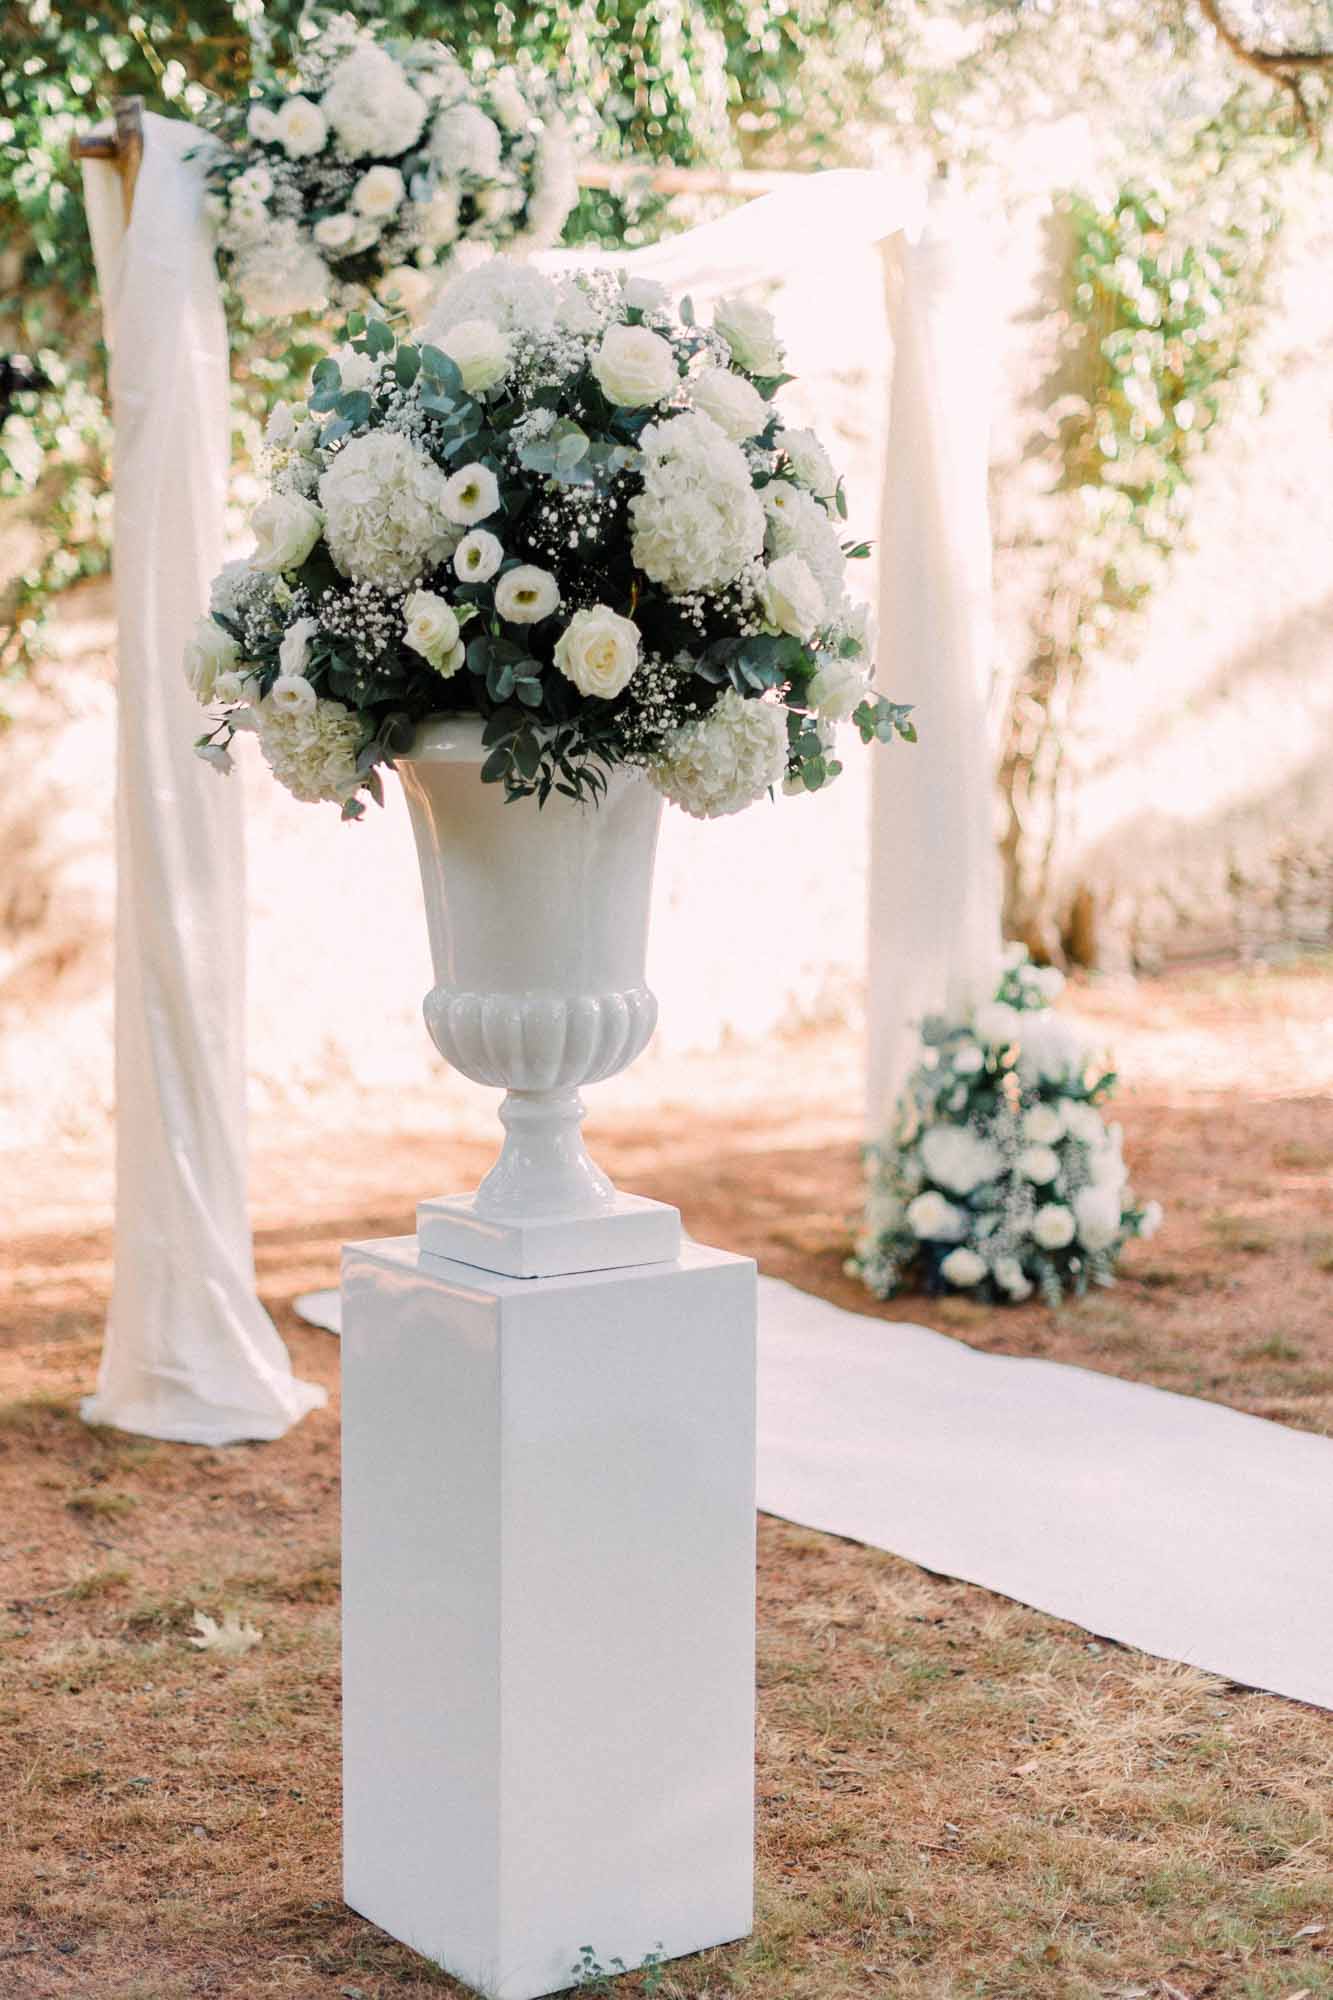 September garden wedding at a 15th century Italian villa | Linda Nari | Featured on Equally Wed, the leading LGBTQ+ wedding magazine - white and green flowers